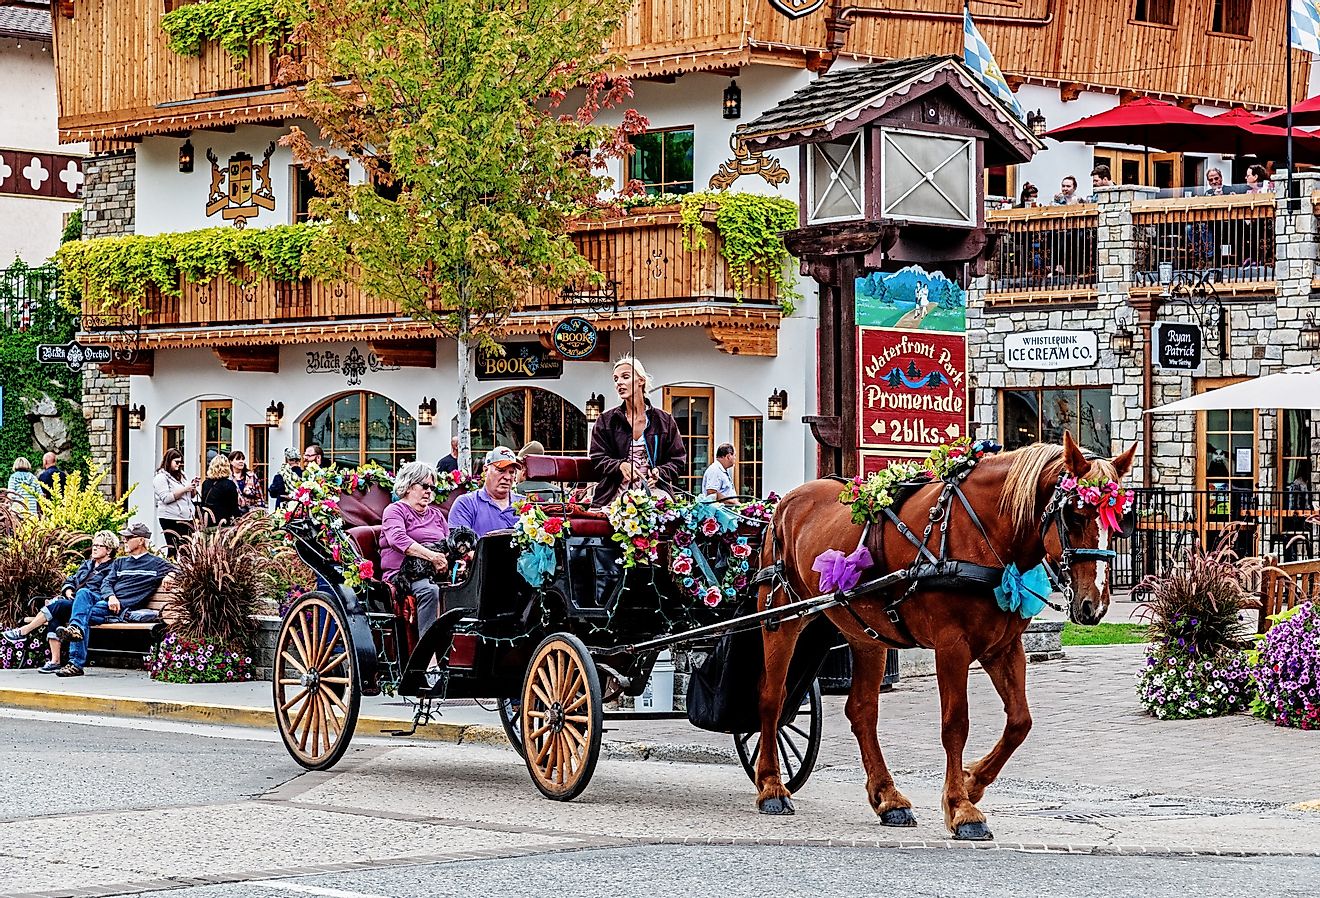 Carriage ride in Leavenworth, Washington. Image credit randy andy via Shutterstock